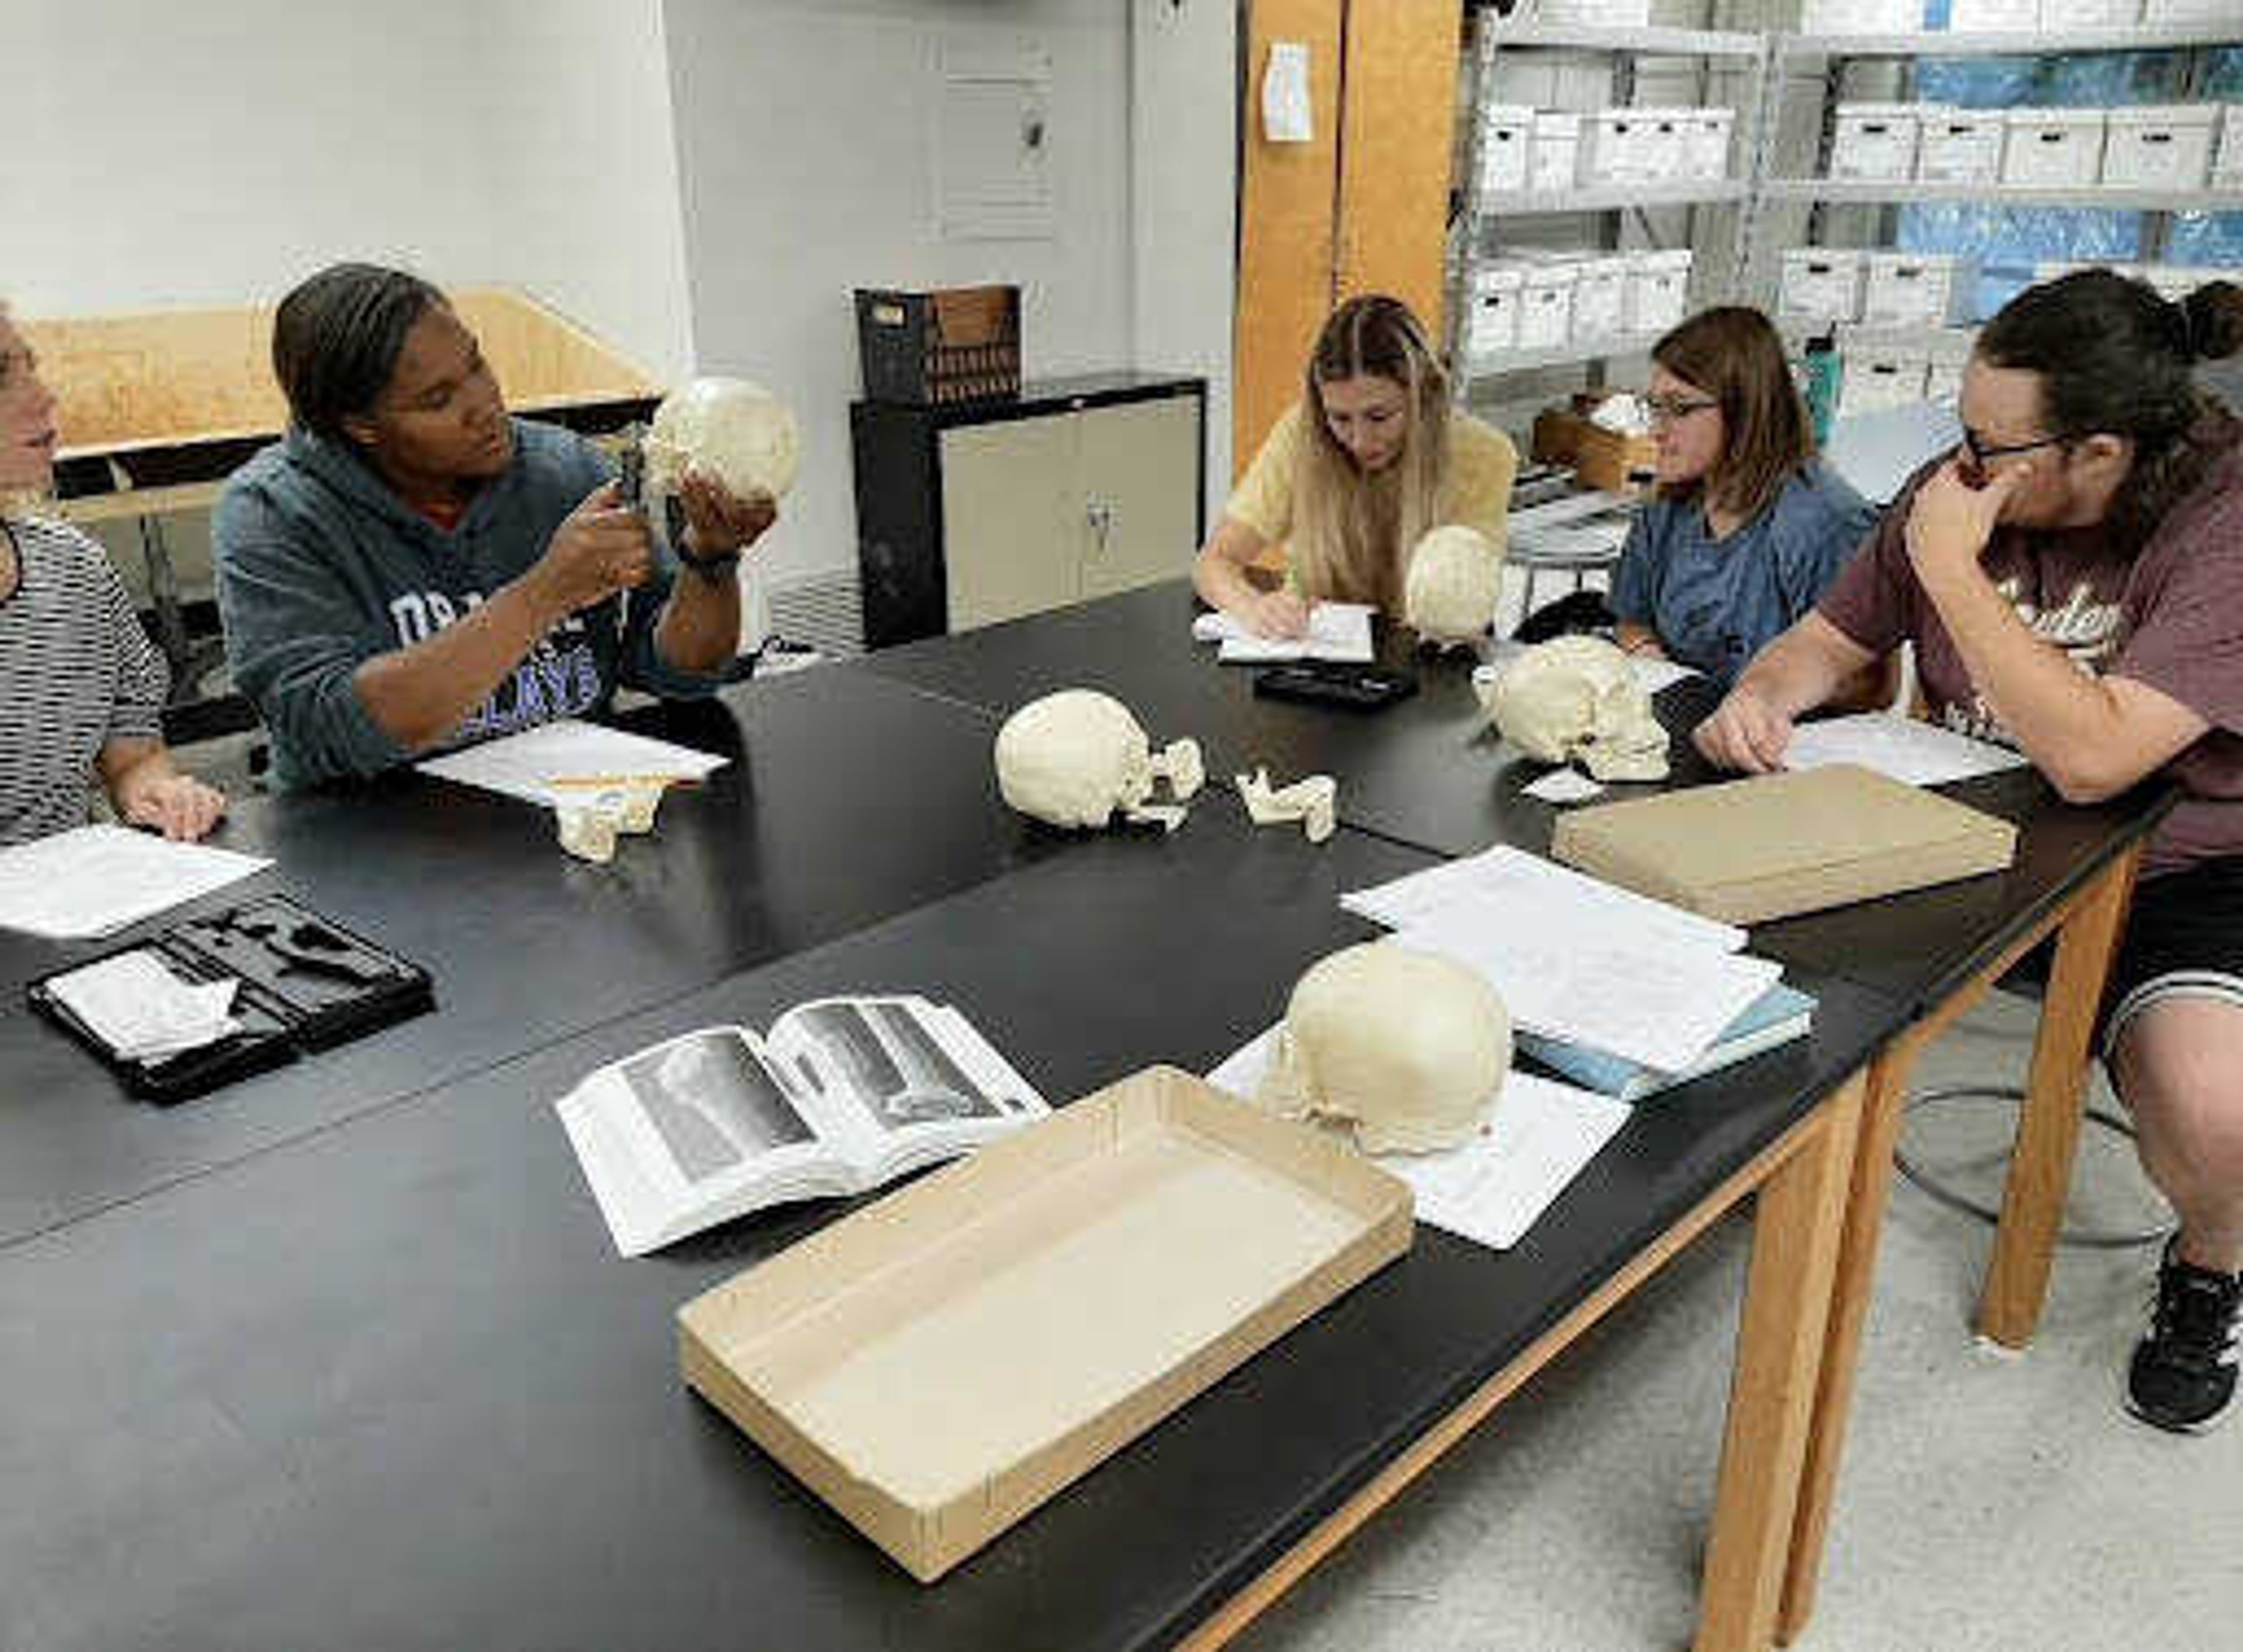 Cold case anthropology class to begin in fall semester